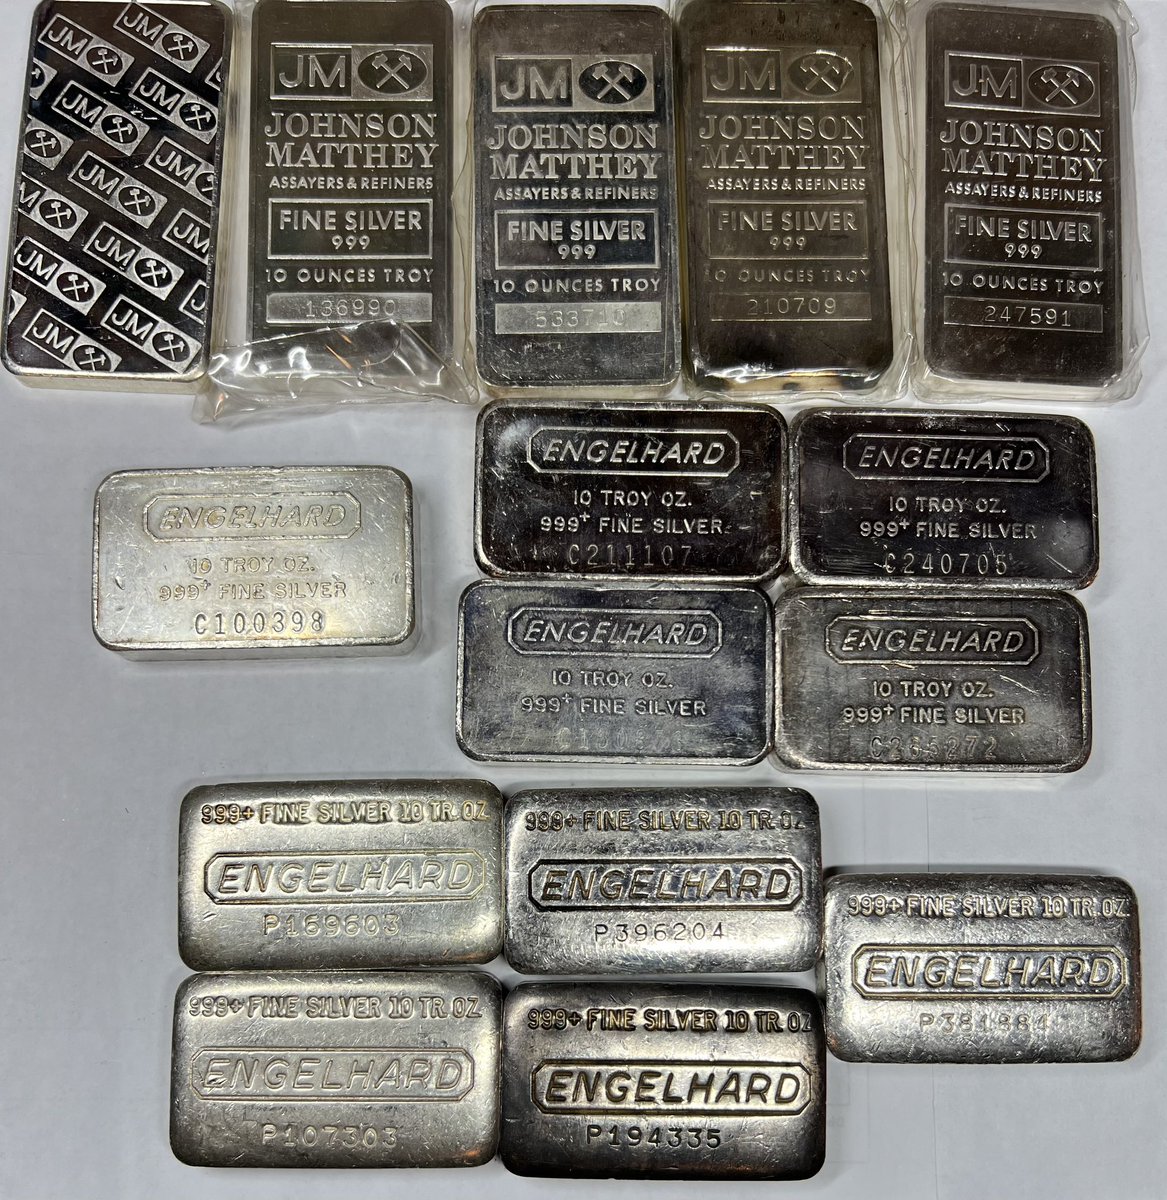 Is silver, silver ? Or does vintage hit different? #engelhard #johnsonmatthey #vintagesilver